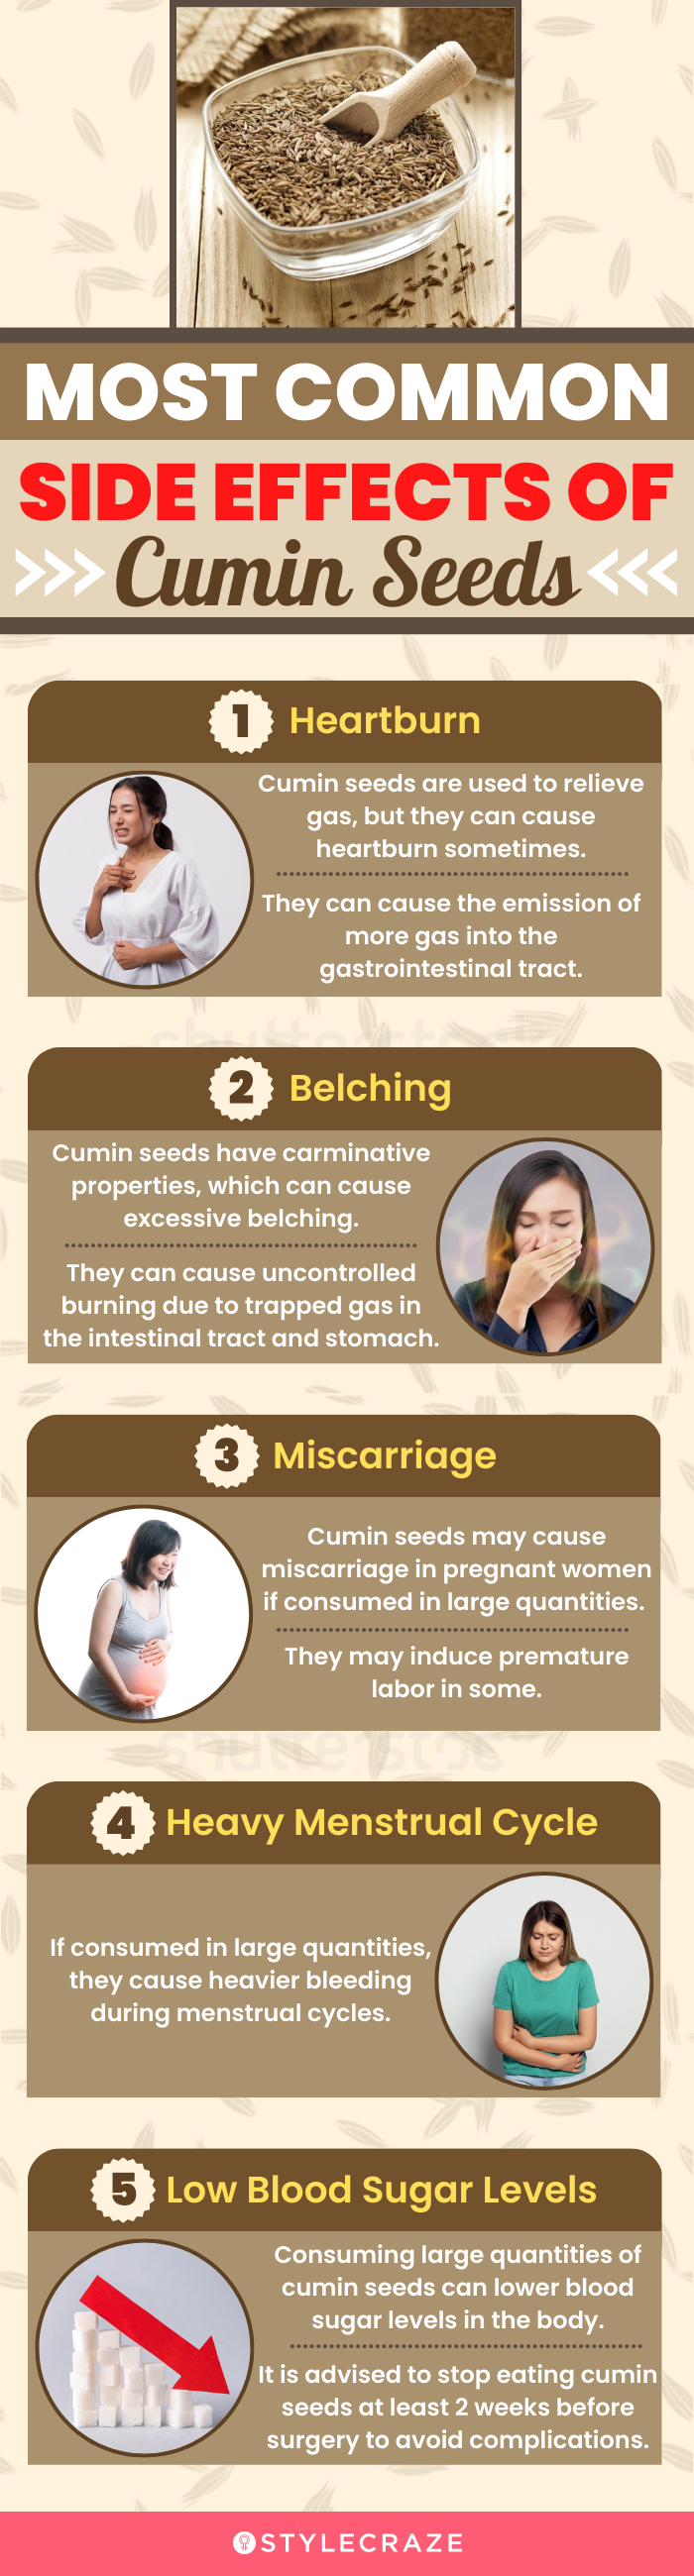 most common side effects of cumin seeds (infographic)